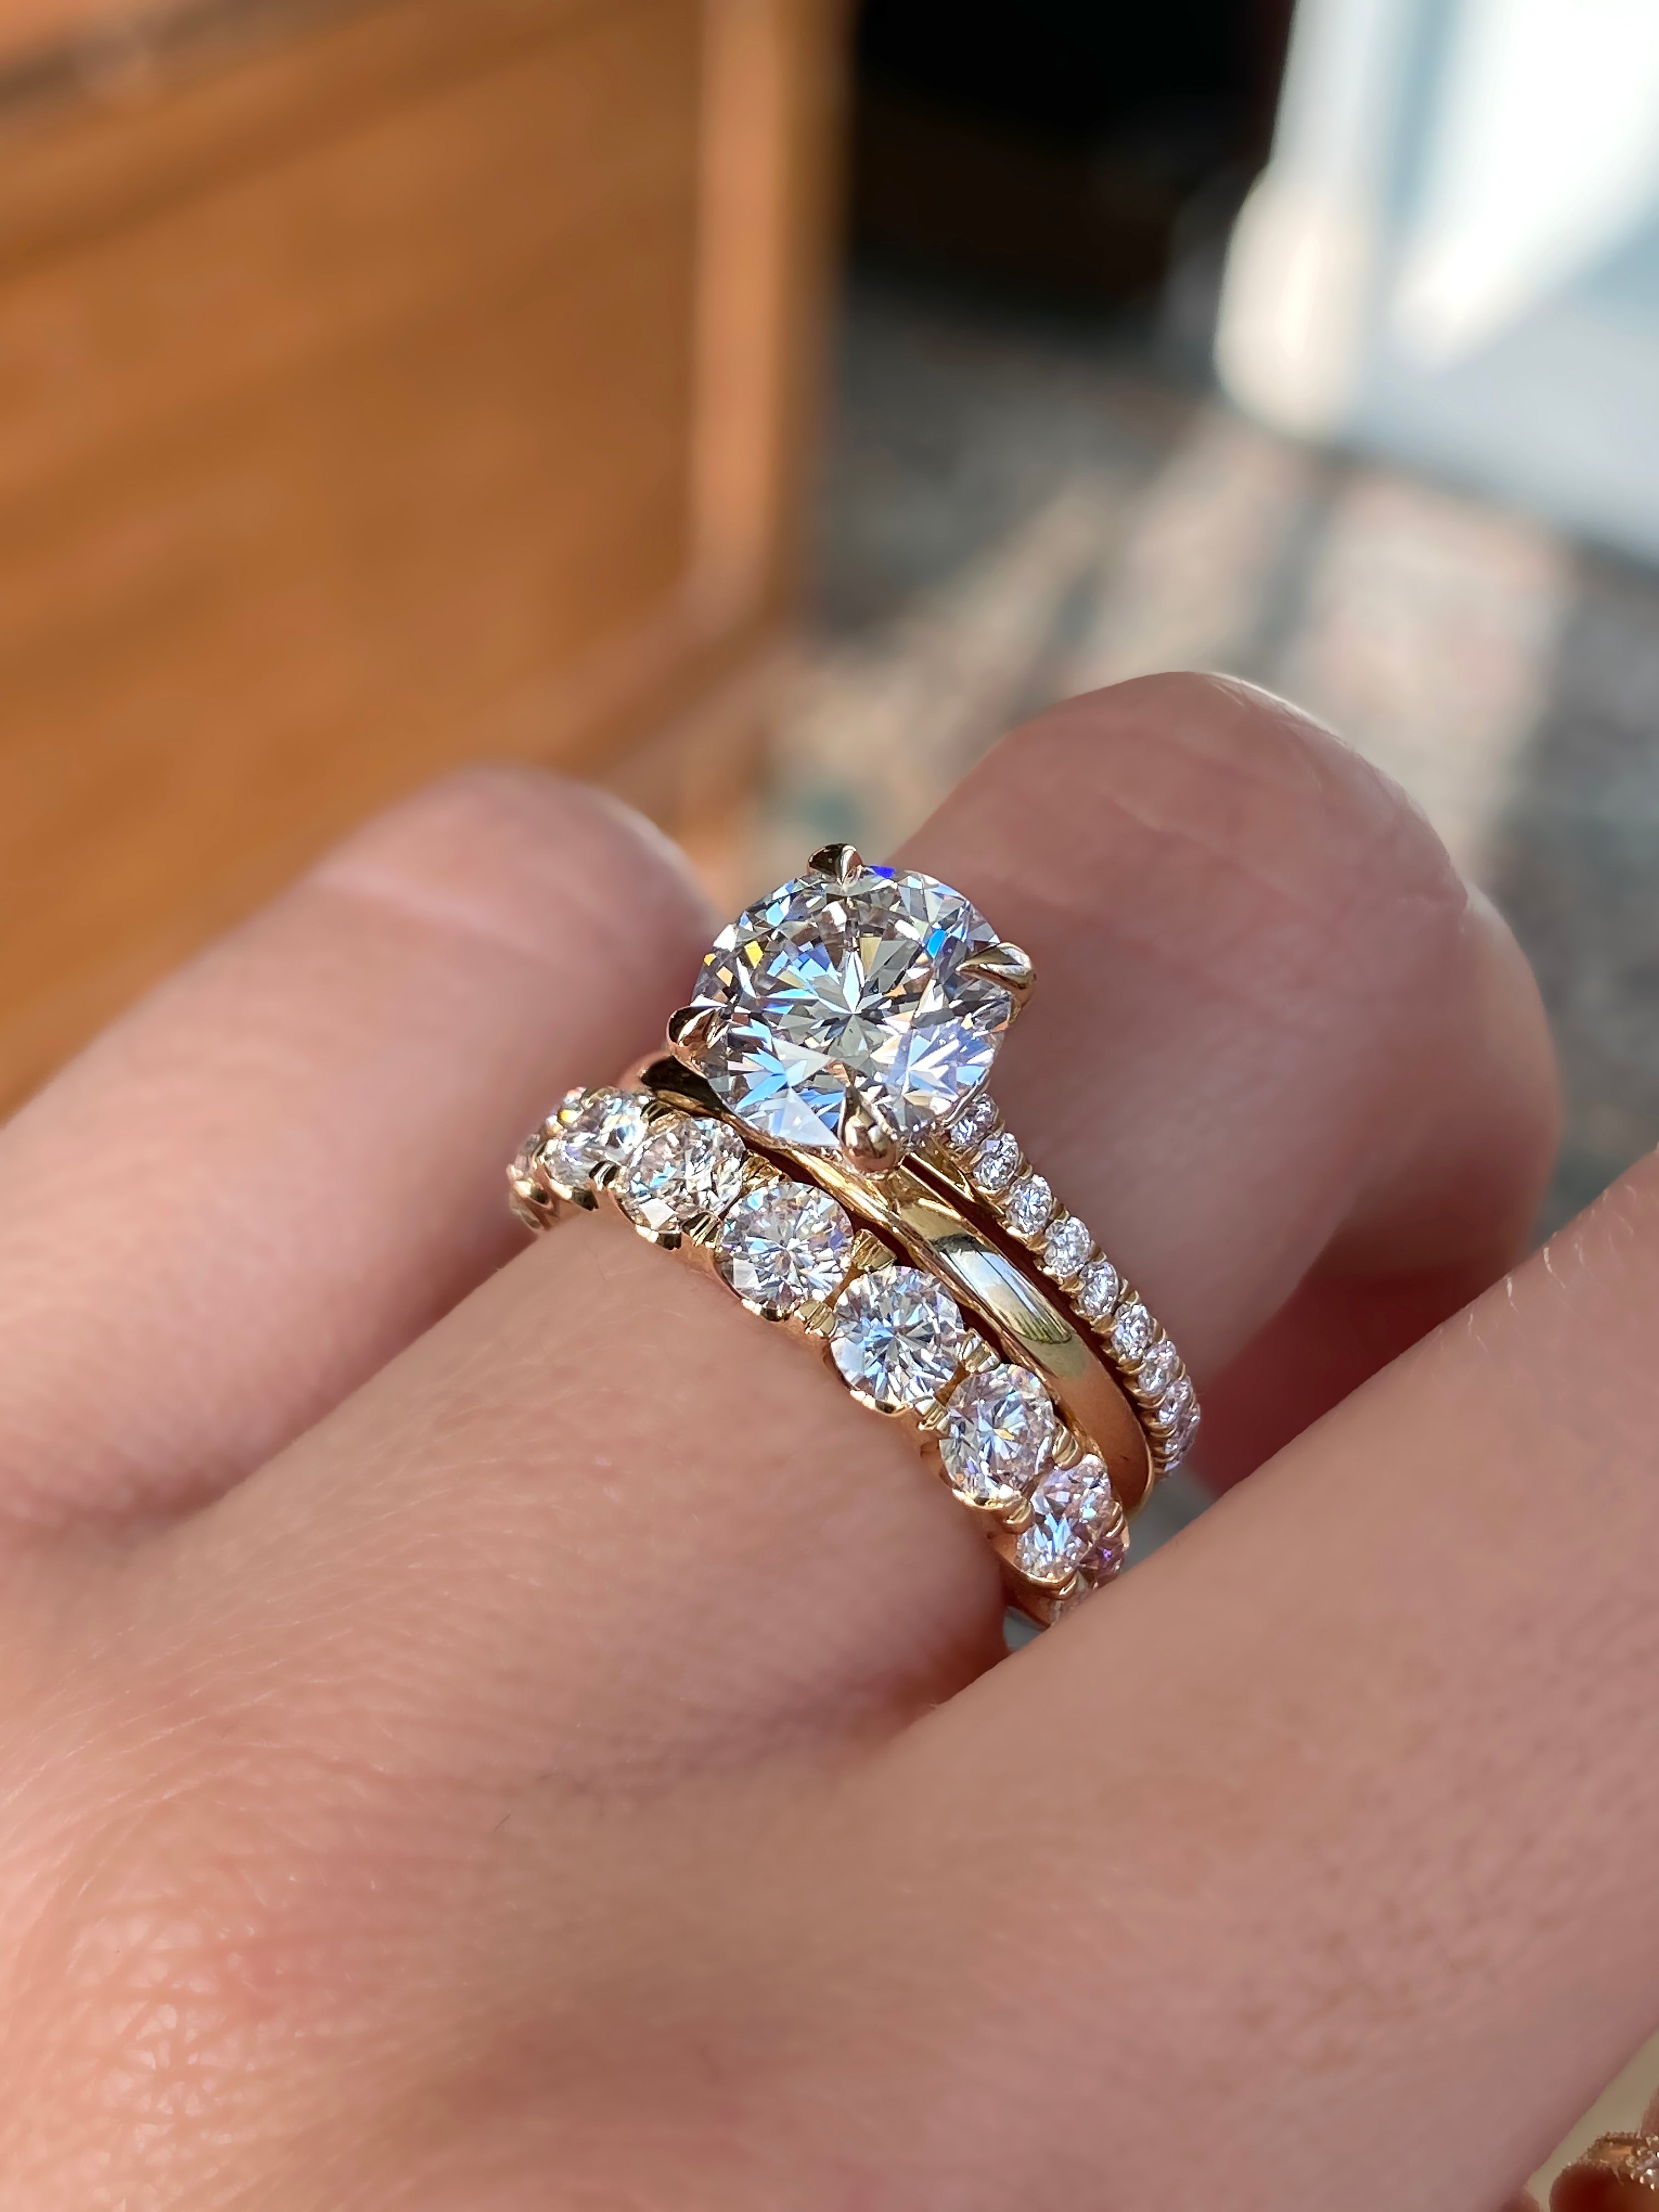 engagement rings and wedding bands